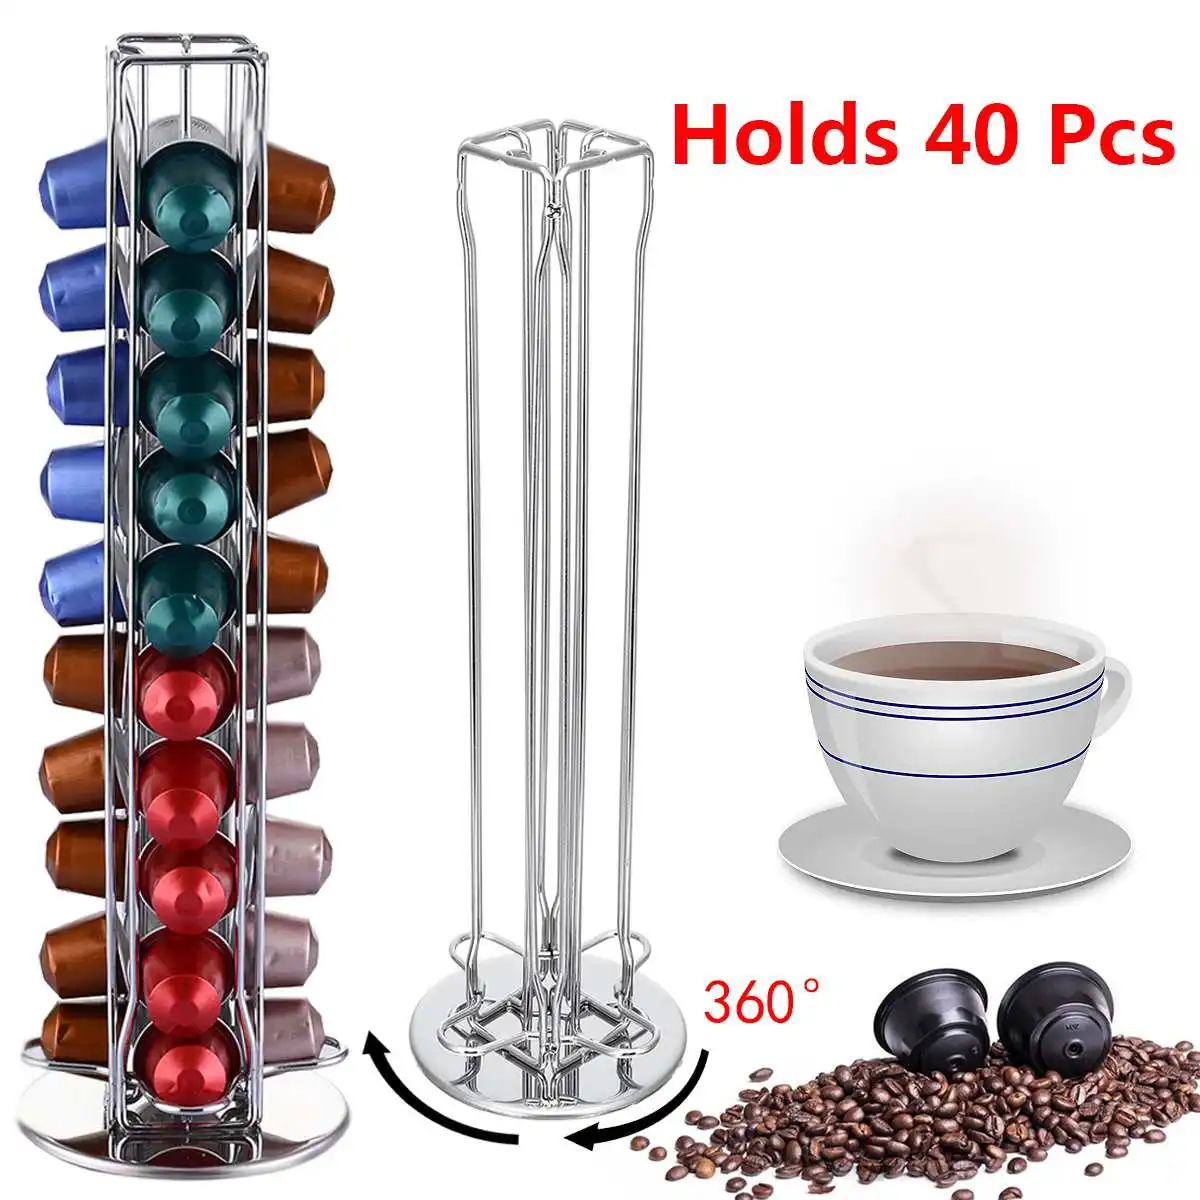 

Capacity of 40 Iron Wire Coffee Pod Capsule Holder 360 Rotatable Rack Tower Organizer Dispenser For Nespresso Counter Cafe Home